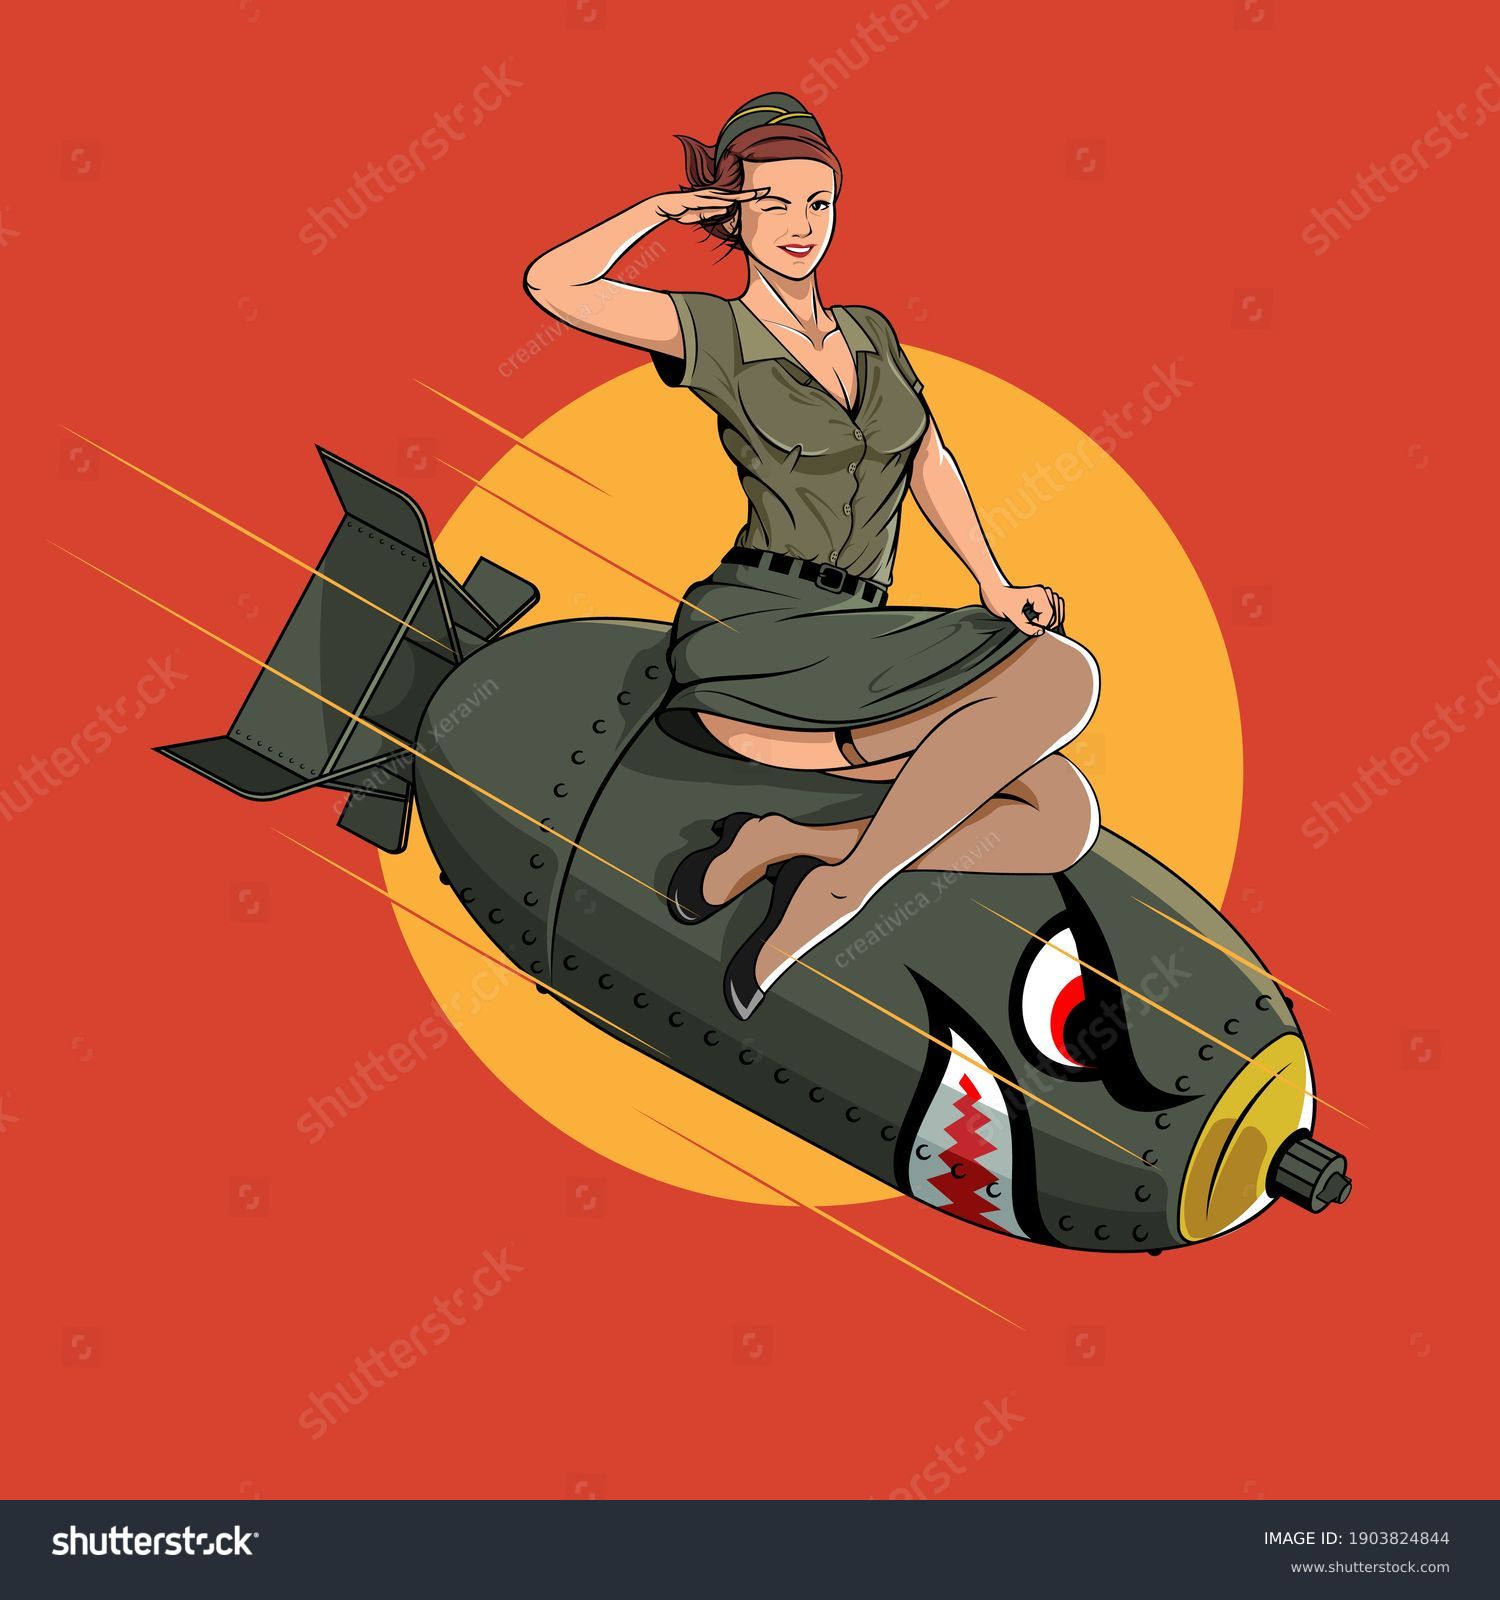 donald patten recommends girl riding a bomb pic